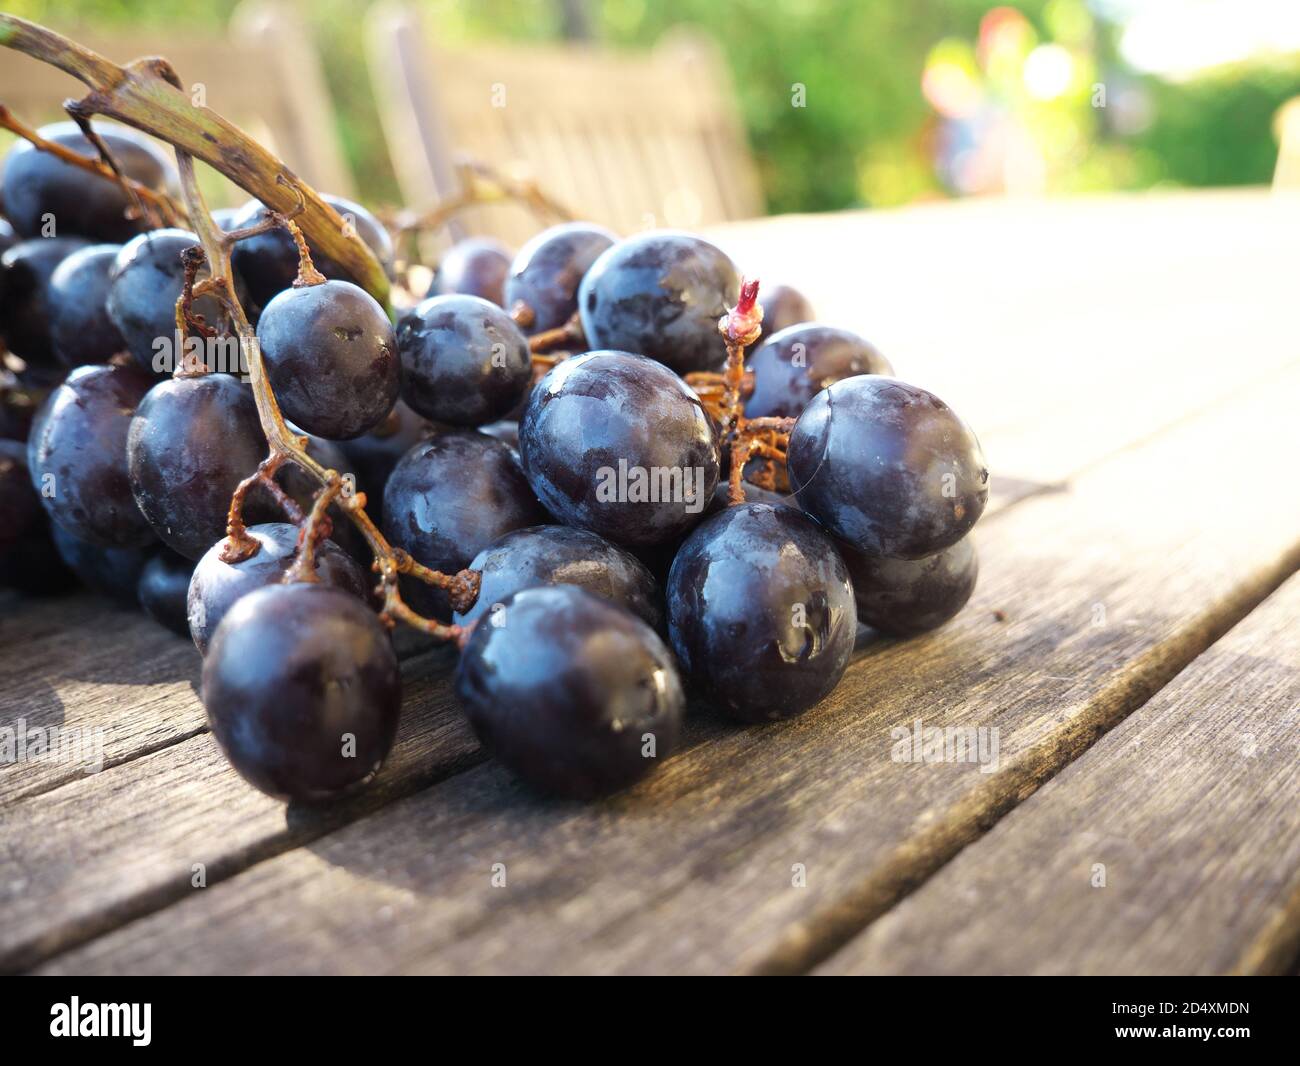 Close-up of grapes on a wooden table outside on a sunny day. Stock Photo